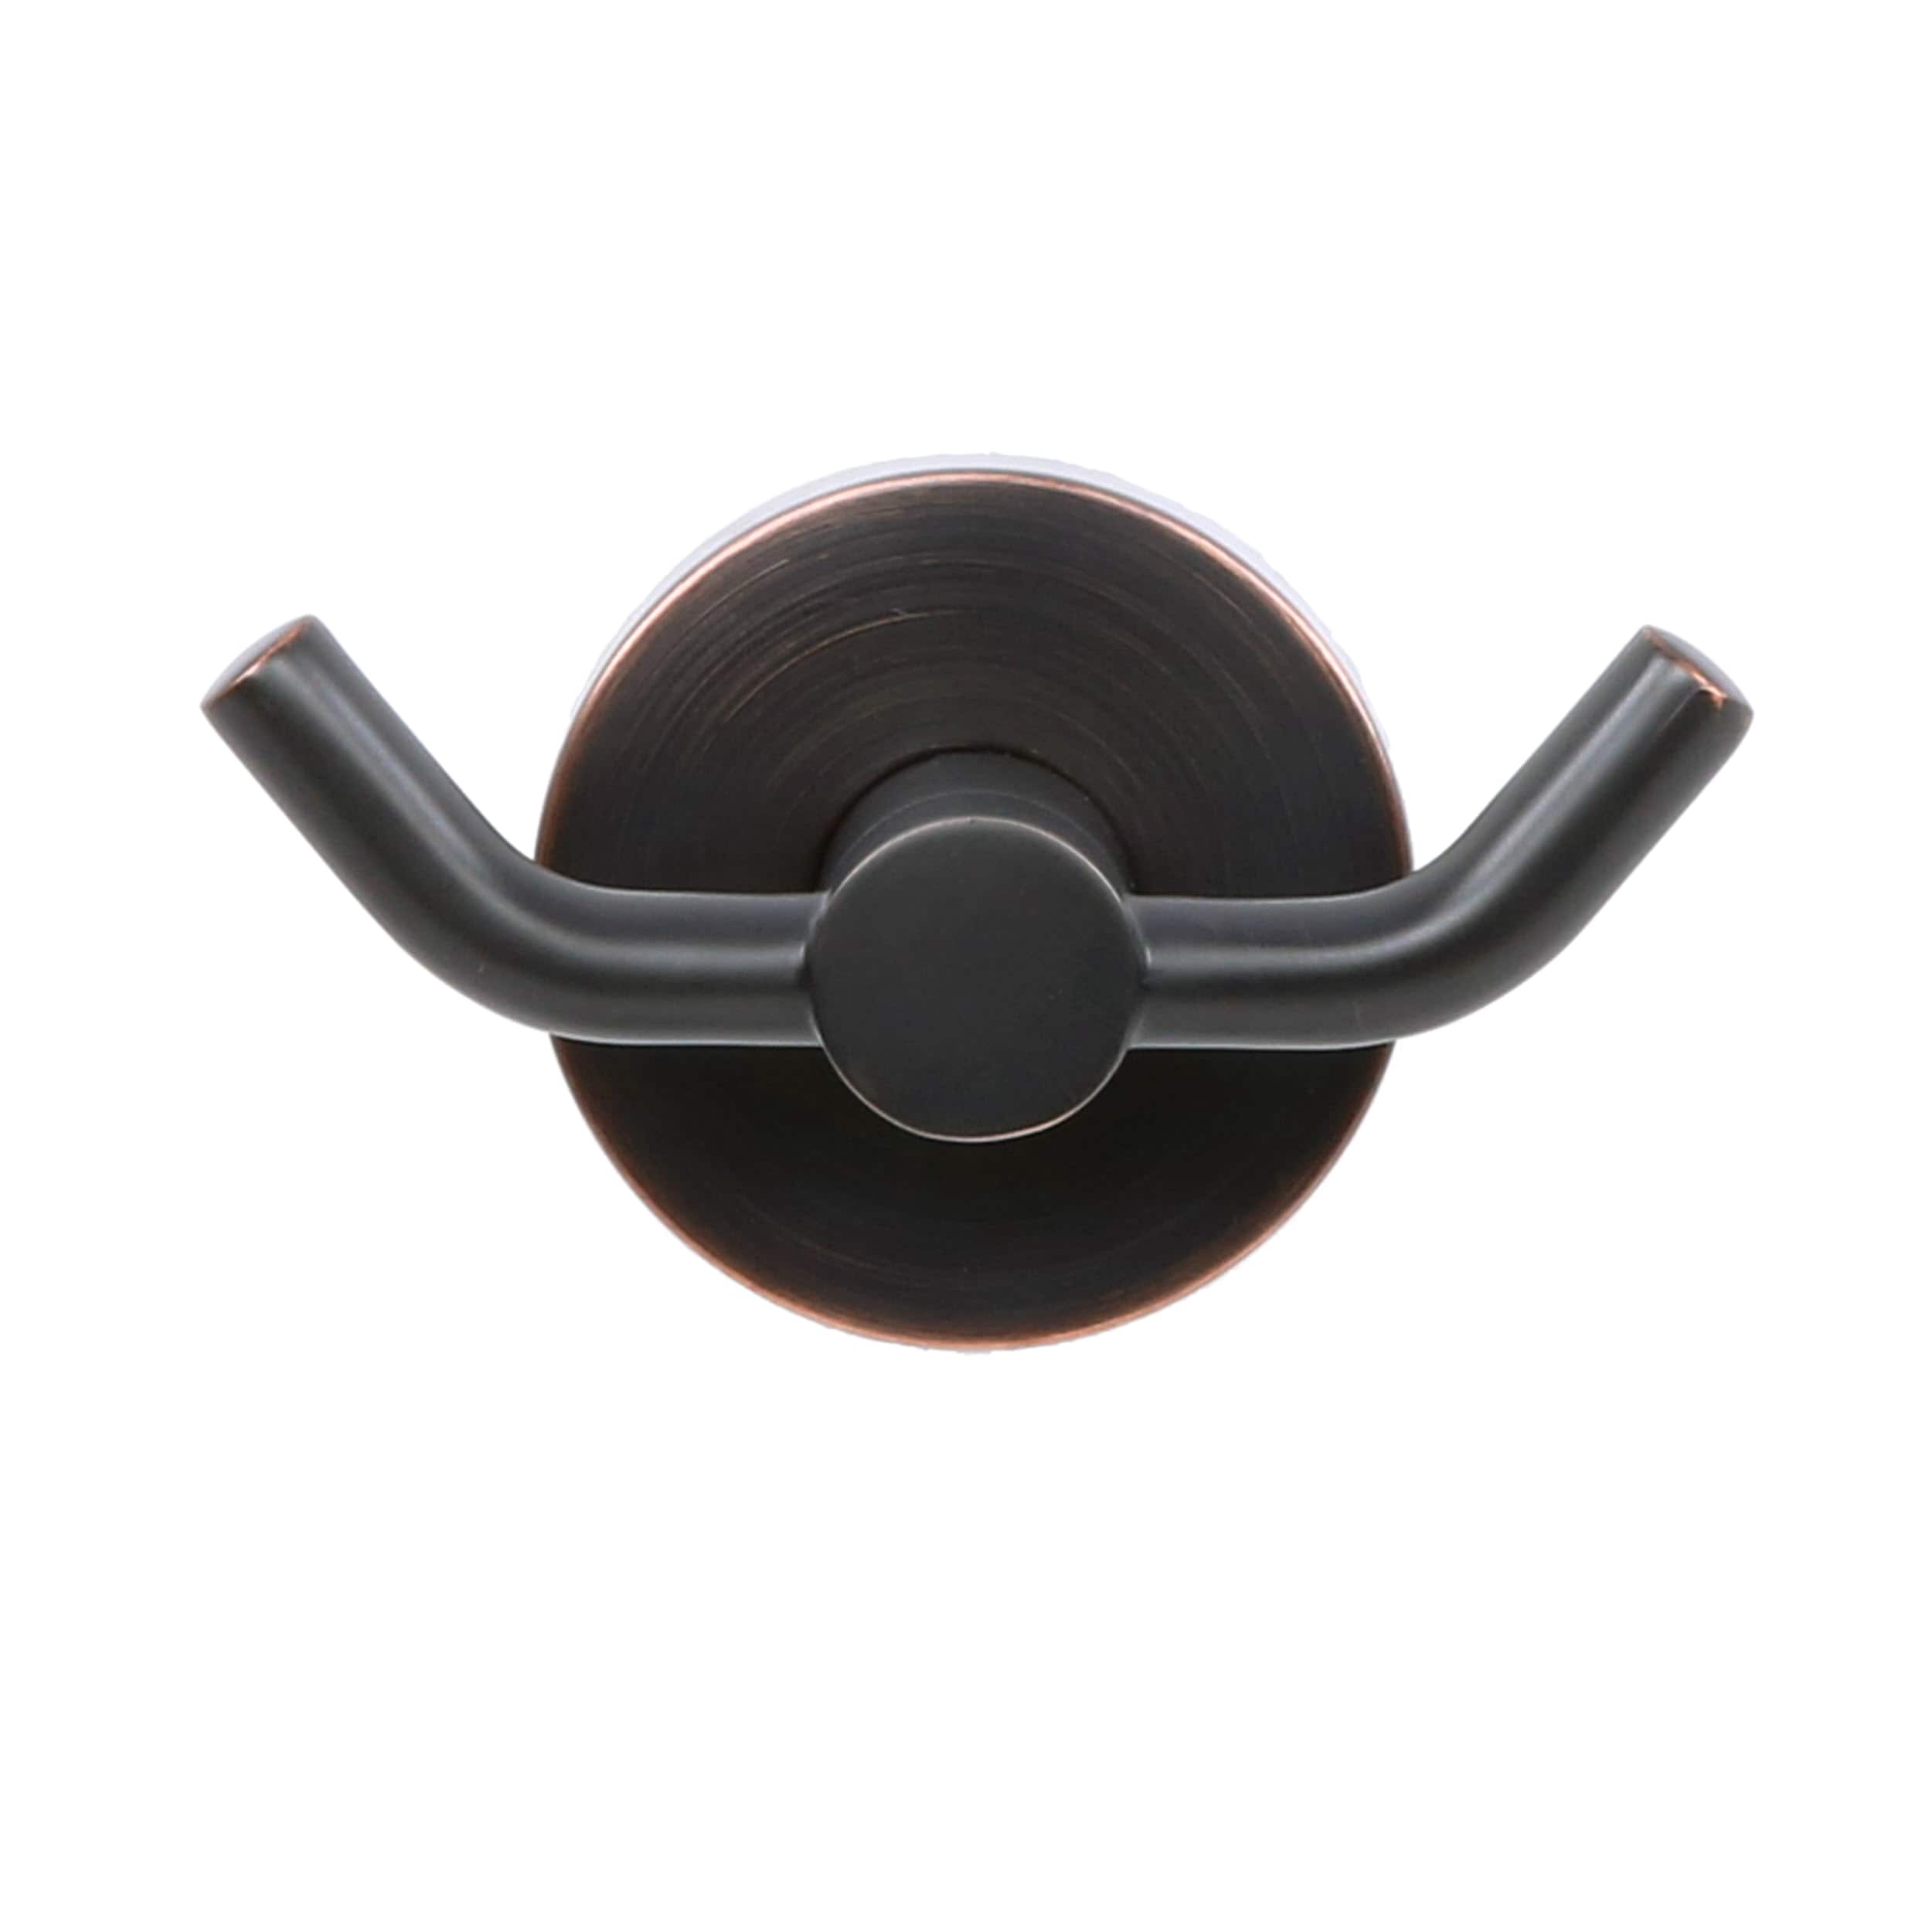 allen + roth Salem Oil-Rubbed Bronze Double-Hook Wall Mount Towel Hook in  the Towel Hooks department at